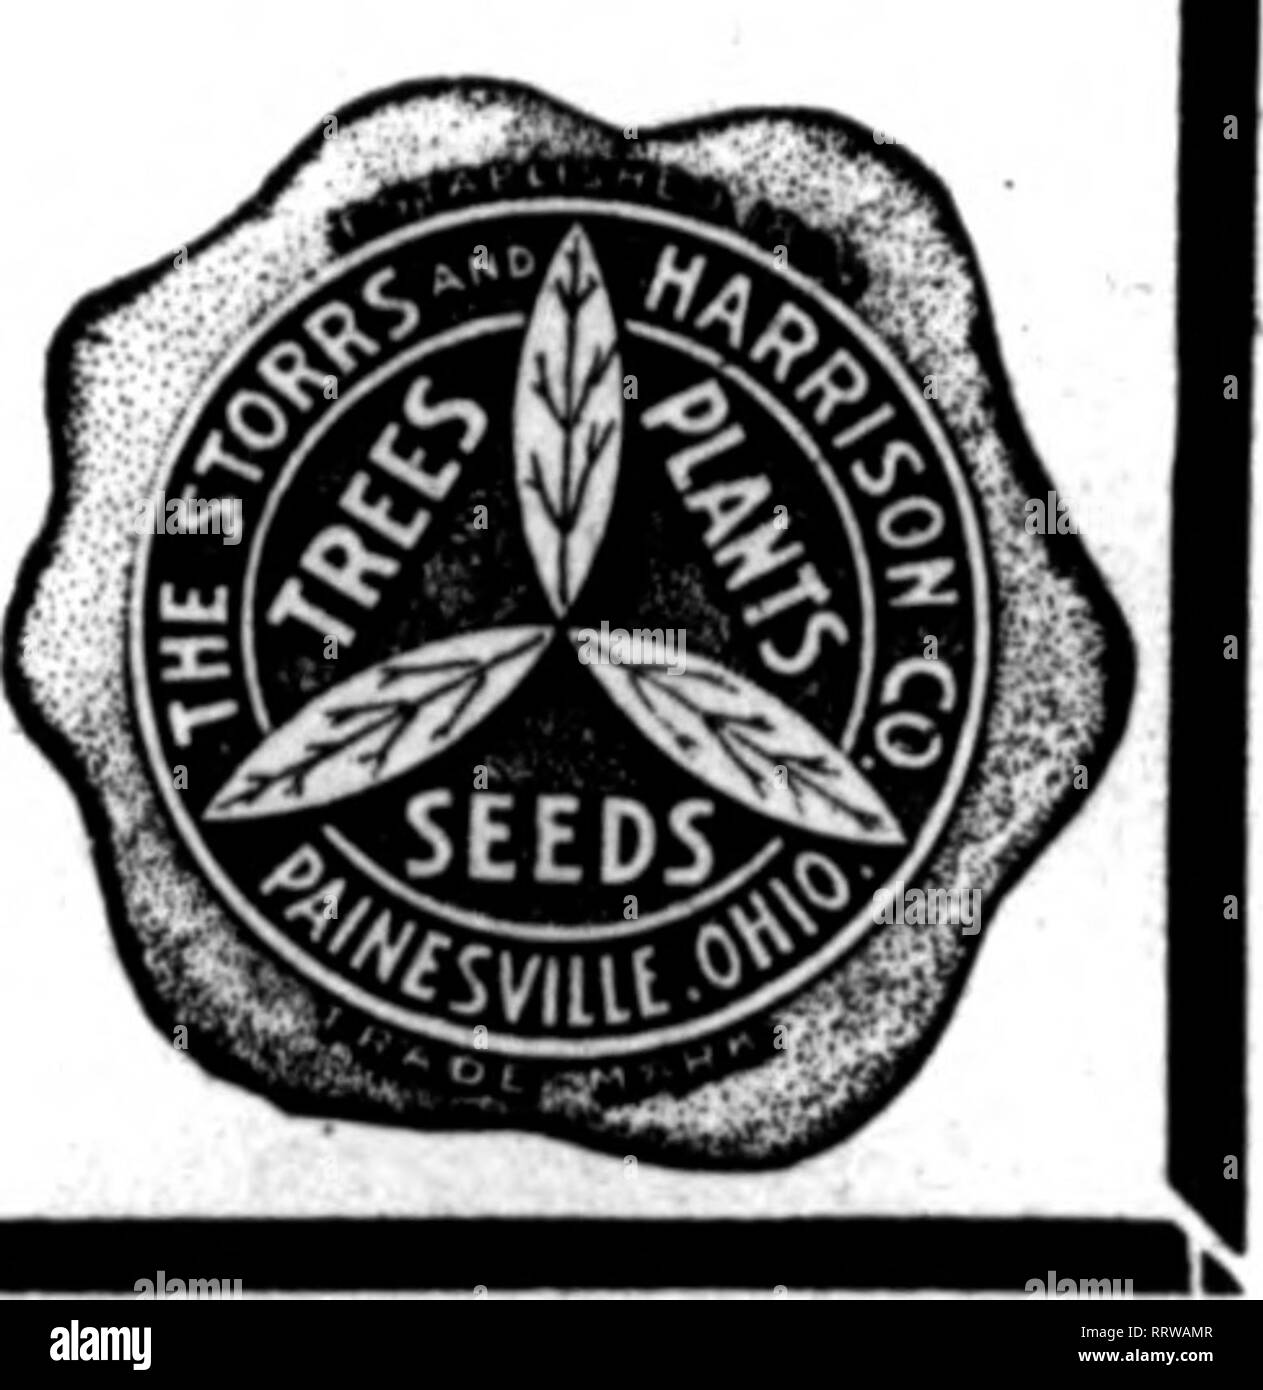 . Florists' review [microform]. Floriculture. &quot;Superb Quality&quot; SEEDS FOR FLORISTS THE STORRS &amp; HARRISON CO.'S SUPERB MIXTURE OF GIANT PANSY SEED Contaias the Ultimate in Qiant Pansies. You cannot buy a better mixture of Pansy Seed at any price. Trade Packet, 50c; k oz., $1.25; oz., $4.00. We carry in stock all named and separate colors of Qiant Pansies. also the best strains of Odier. Gassier, BuRnot, Trimardeau. etc. (See our trade list for prices.) Mixed color* (a magnificent •train), trade packet, $1.00 Cineraria Grandiflora Bellis Perennis (English Daisy) Longfellow (red), Sn Stock Photo